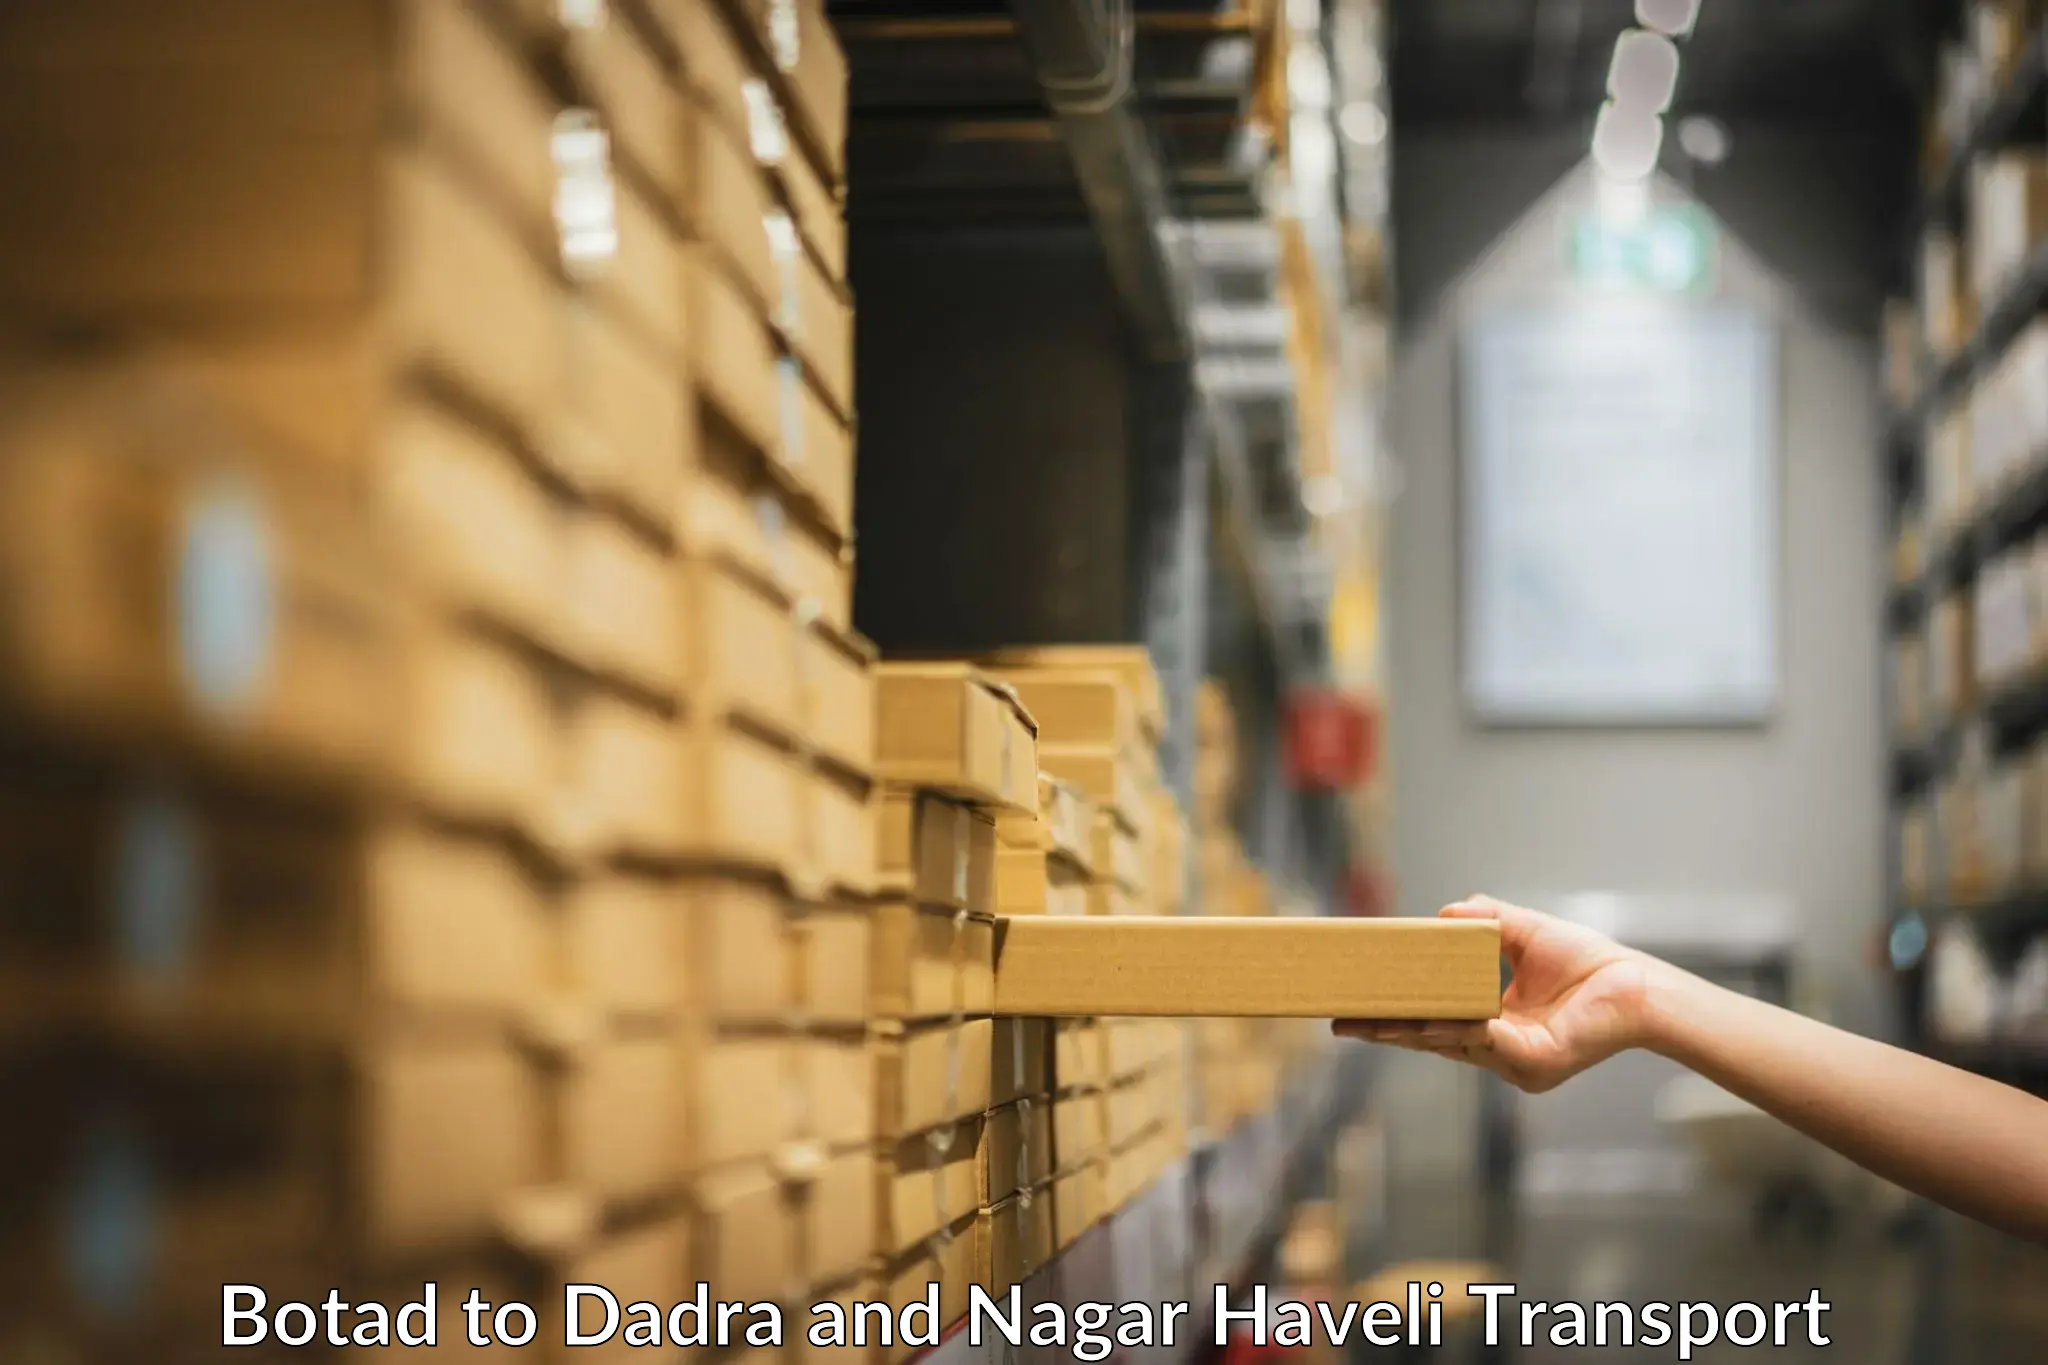 Transport services in Botad to Dadra and Nagar Haveli